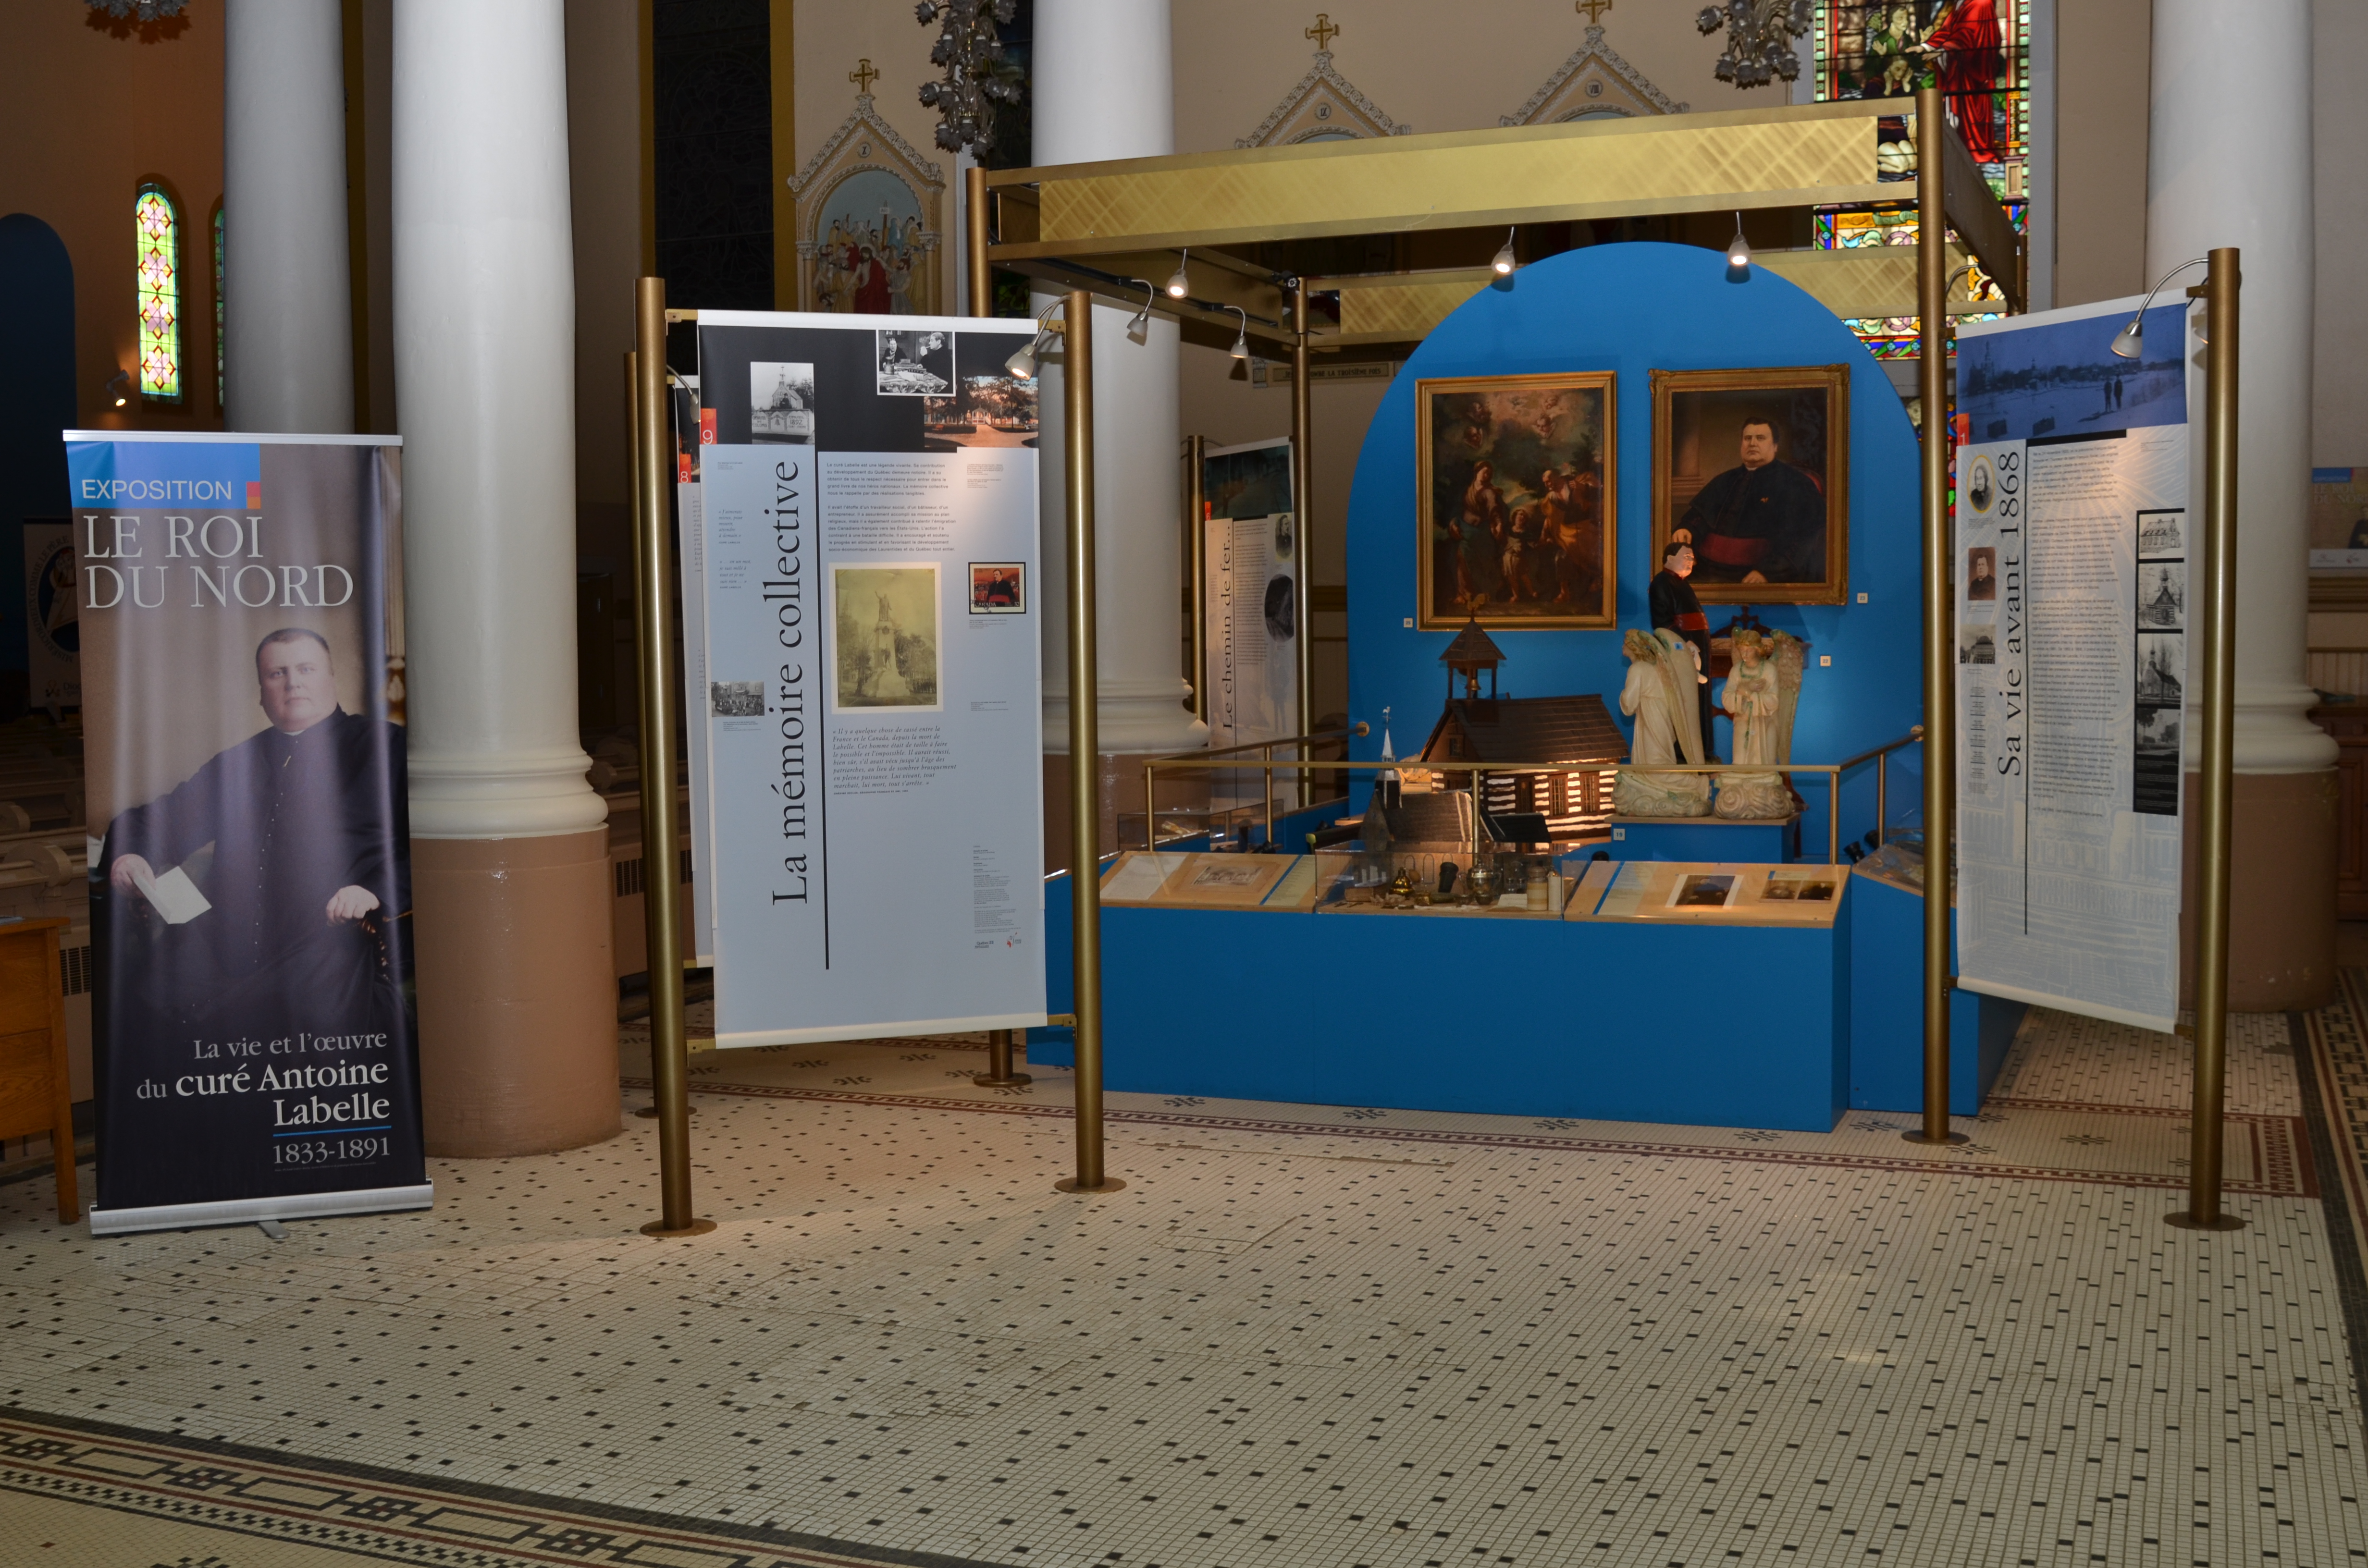 Colour photograph of exhibition panels with texts and images, surrounding display cases housing various objects.